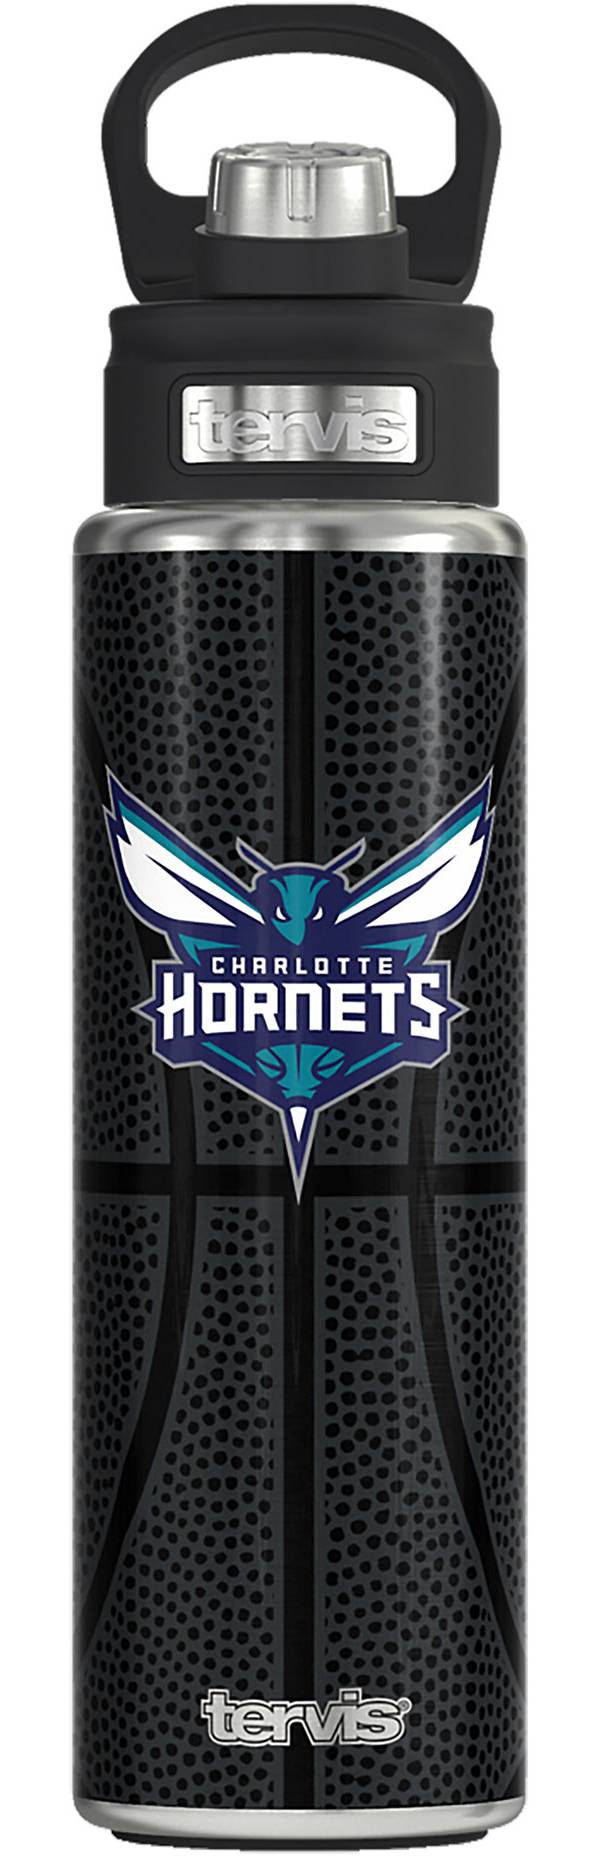 Tervis Charlotte Hornets 24oz. Stainless Steel Water Bottle product image